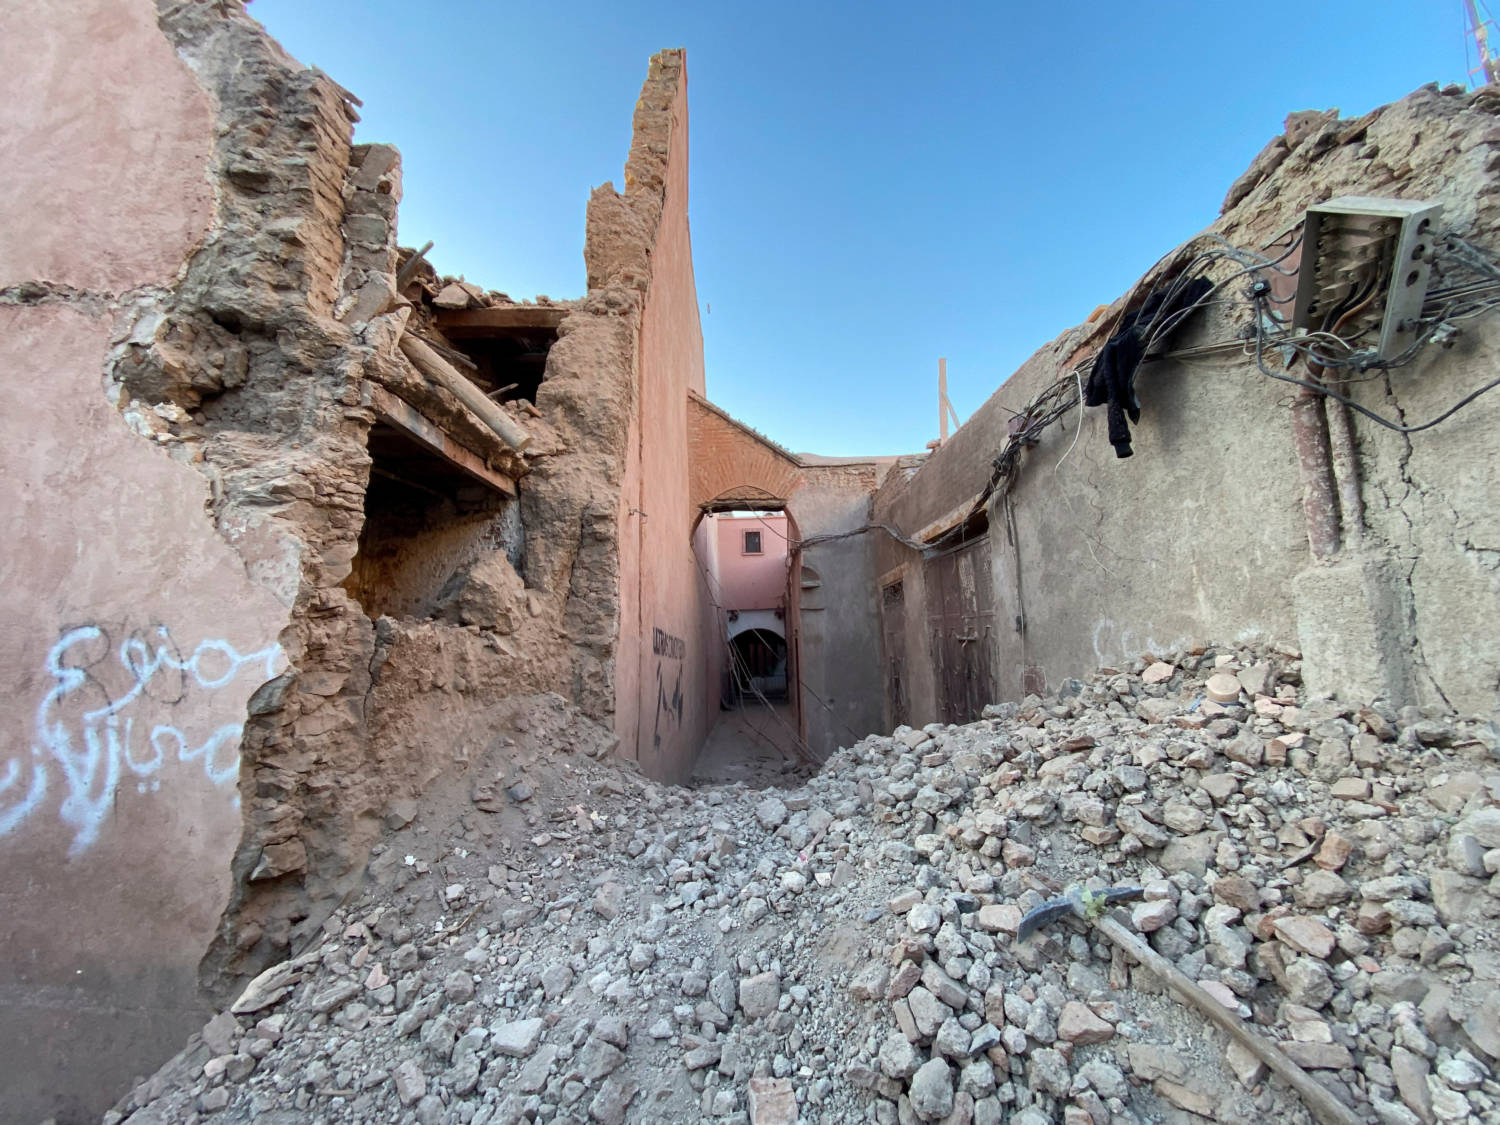 Damage In The Historic City Of Marrakech, Following A Powerful Earthquake